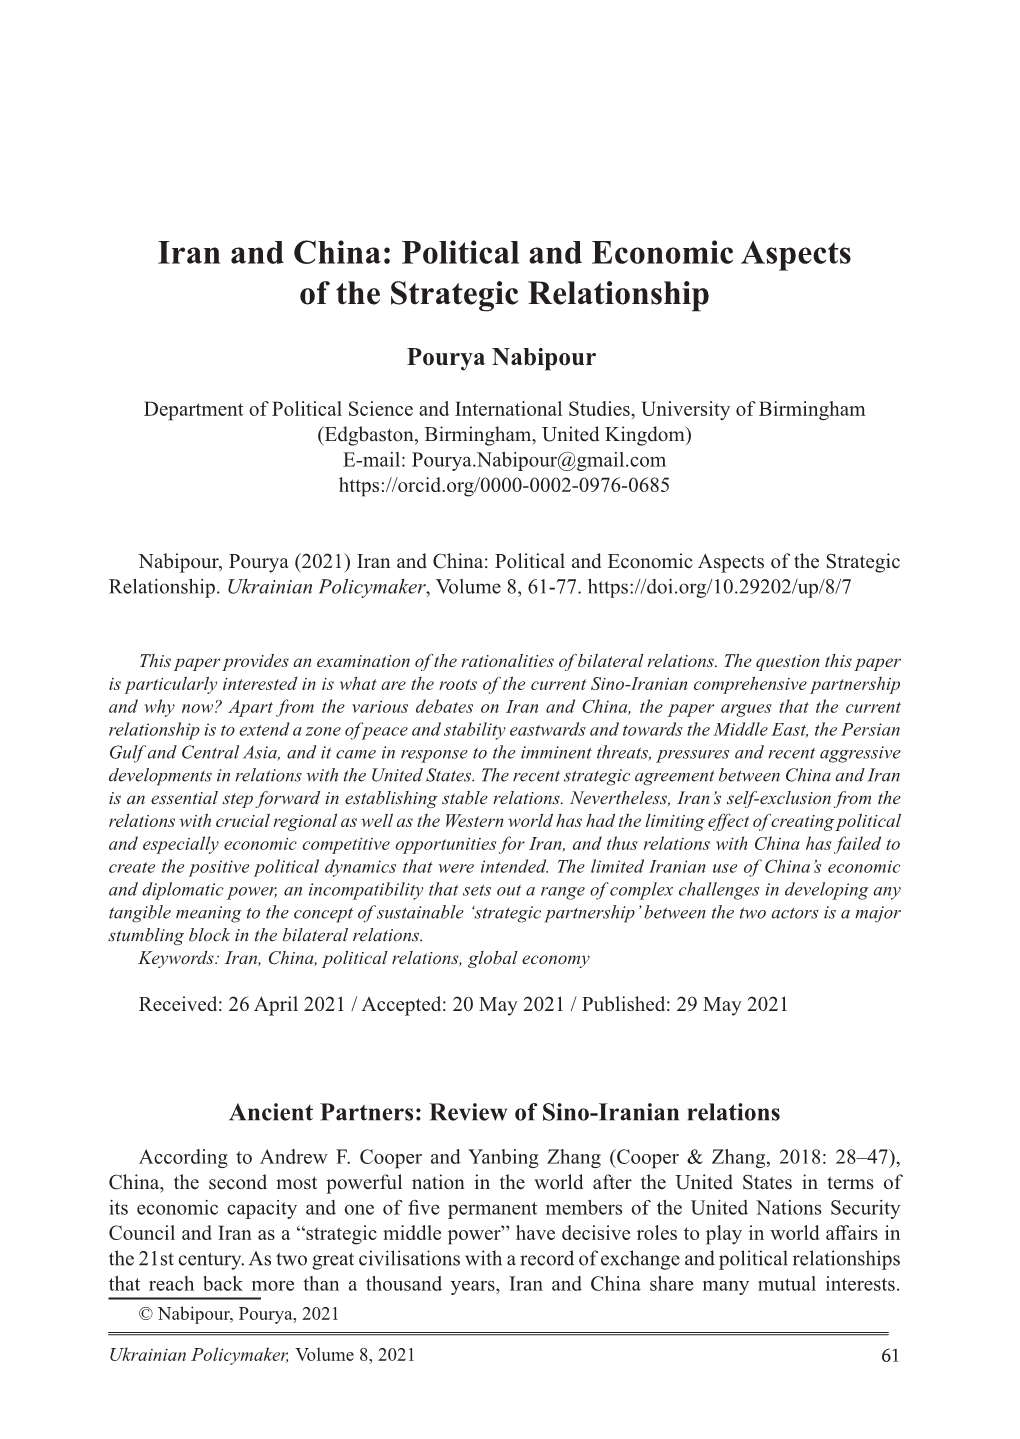 Iran and China: Political and Economic Aspects of the Strategic Relationship